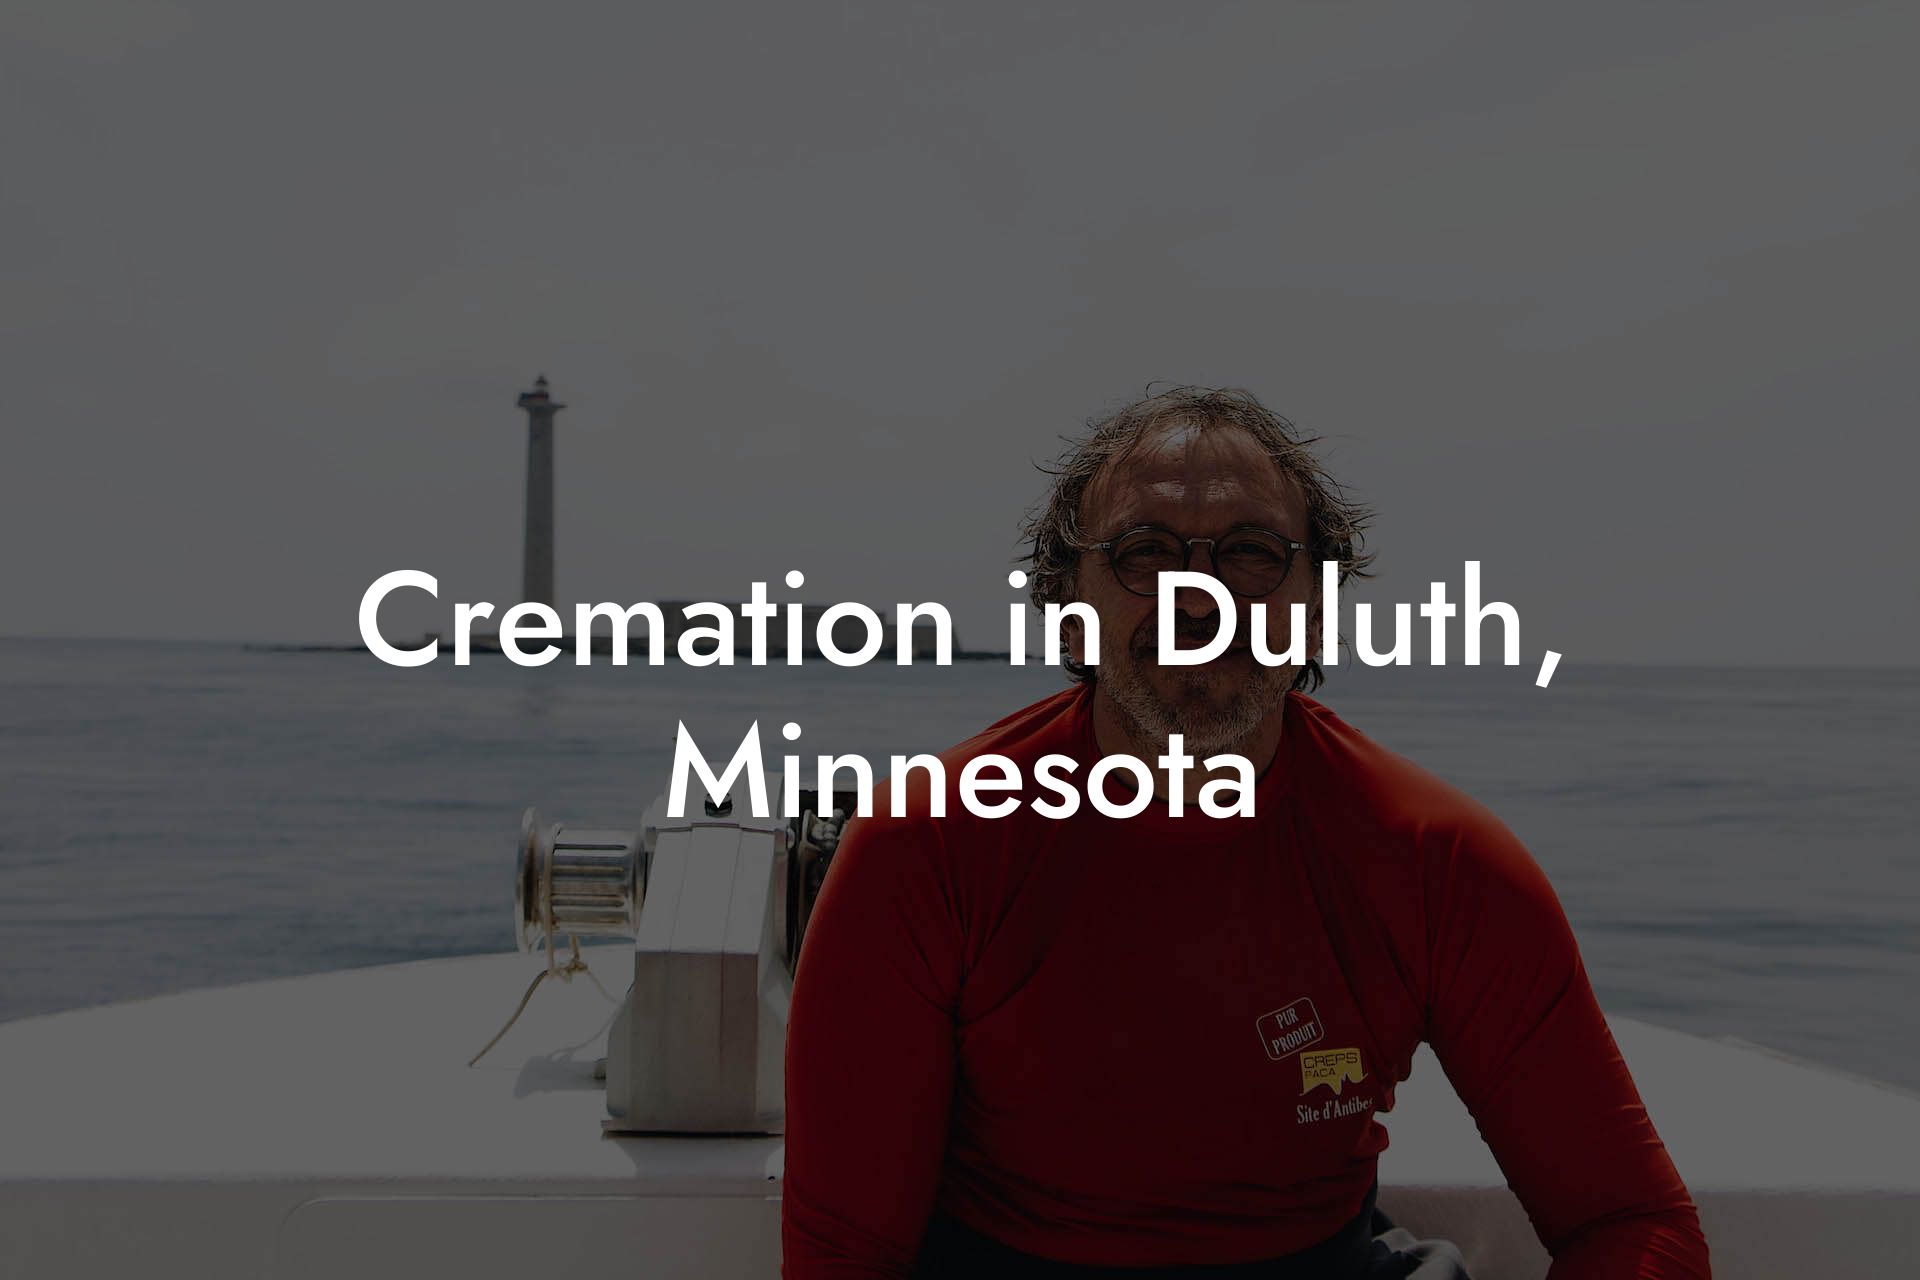 Cremation in Duluth, Minnesota